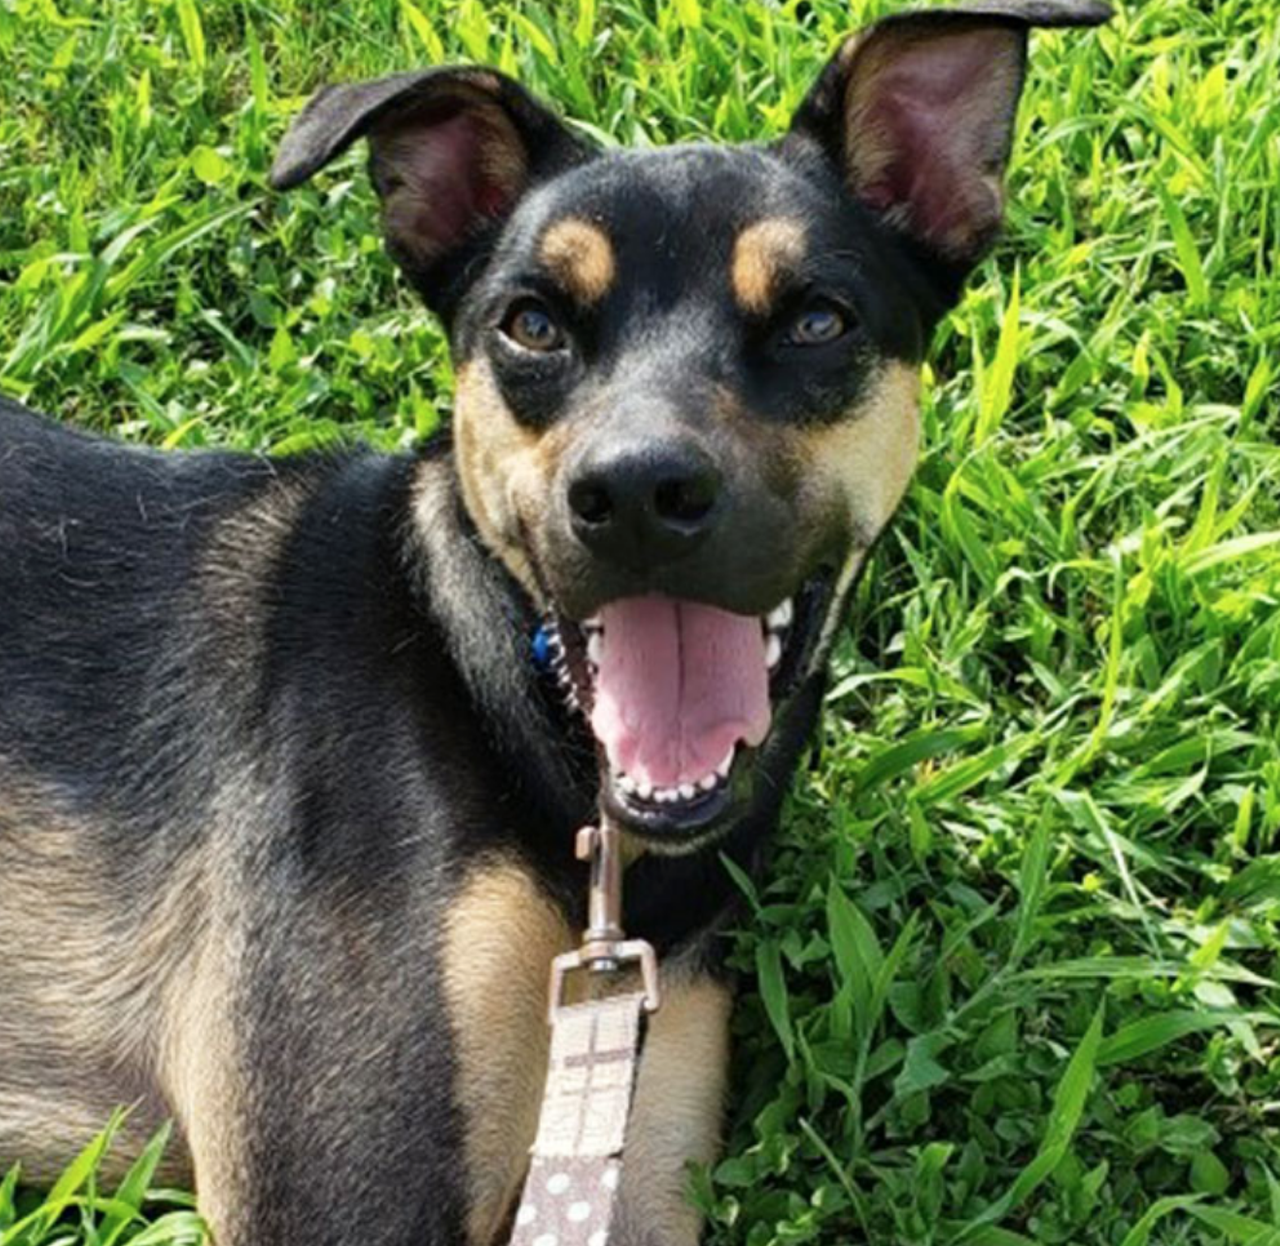 Germany
"Guten tag! My name is Germany! I am a very sweet and playful young man. I’m an active guy too! I believe I would make a fantastic running buddy! I enjoy going out on adventures and daily walks. I hope my next adventure can be with you!"